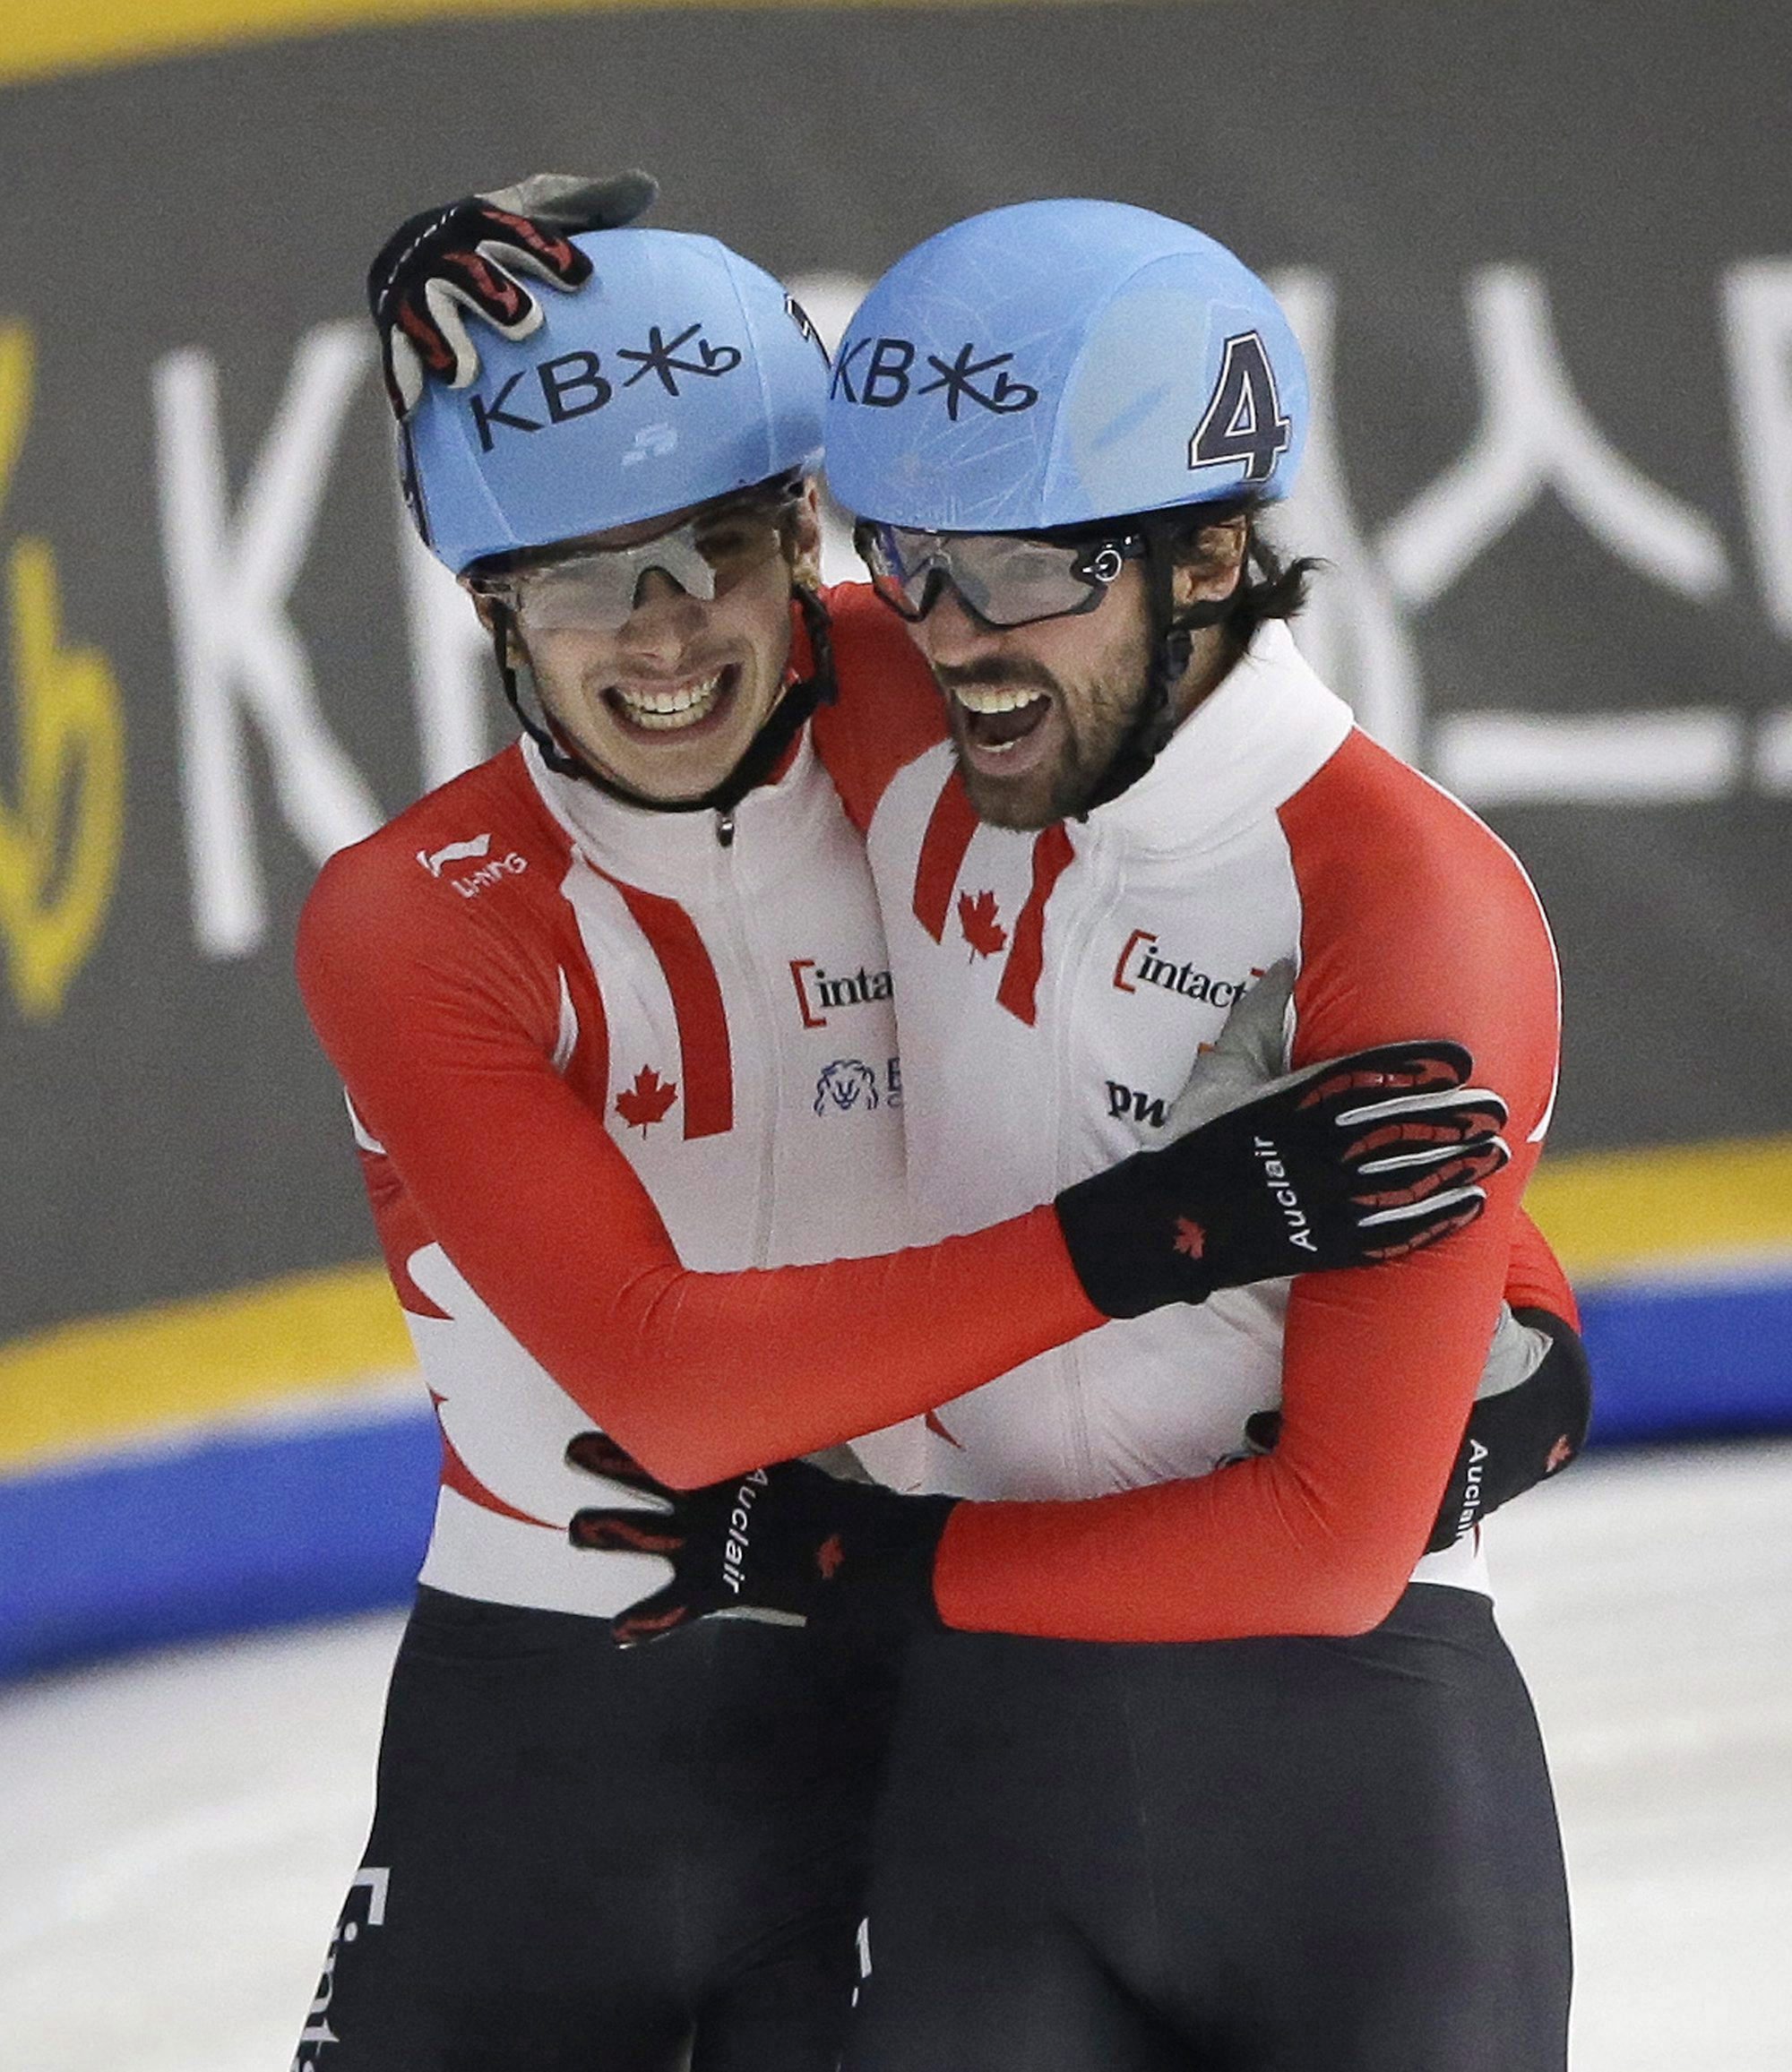 Charles Hamelin, right, and Samuel Girard of Canada celebrate after the men's 1000 meter final race at the ISU World Cup Short Track Speed Skating competition in Seoul, South Korea, Sunday, March 13, 2016. Hamelin won the race while Girard took second. (AP Photo/Ahn Young-joon)